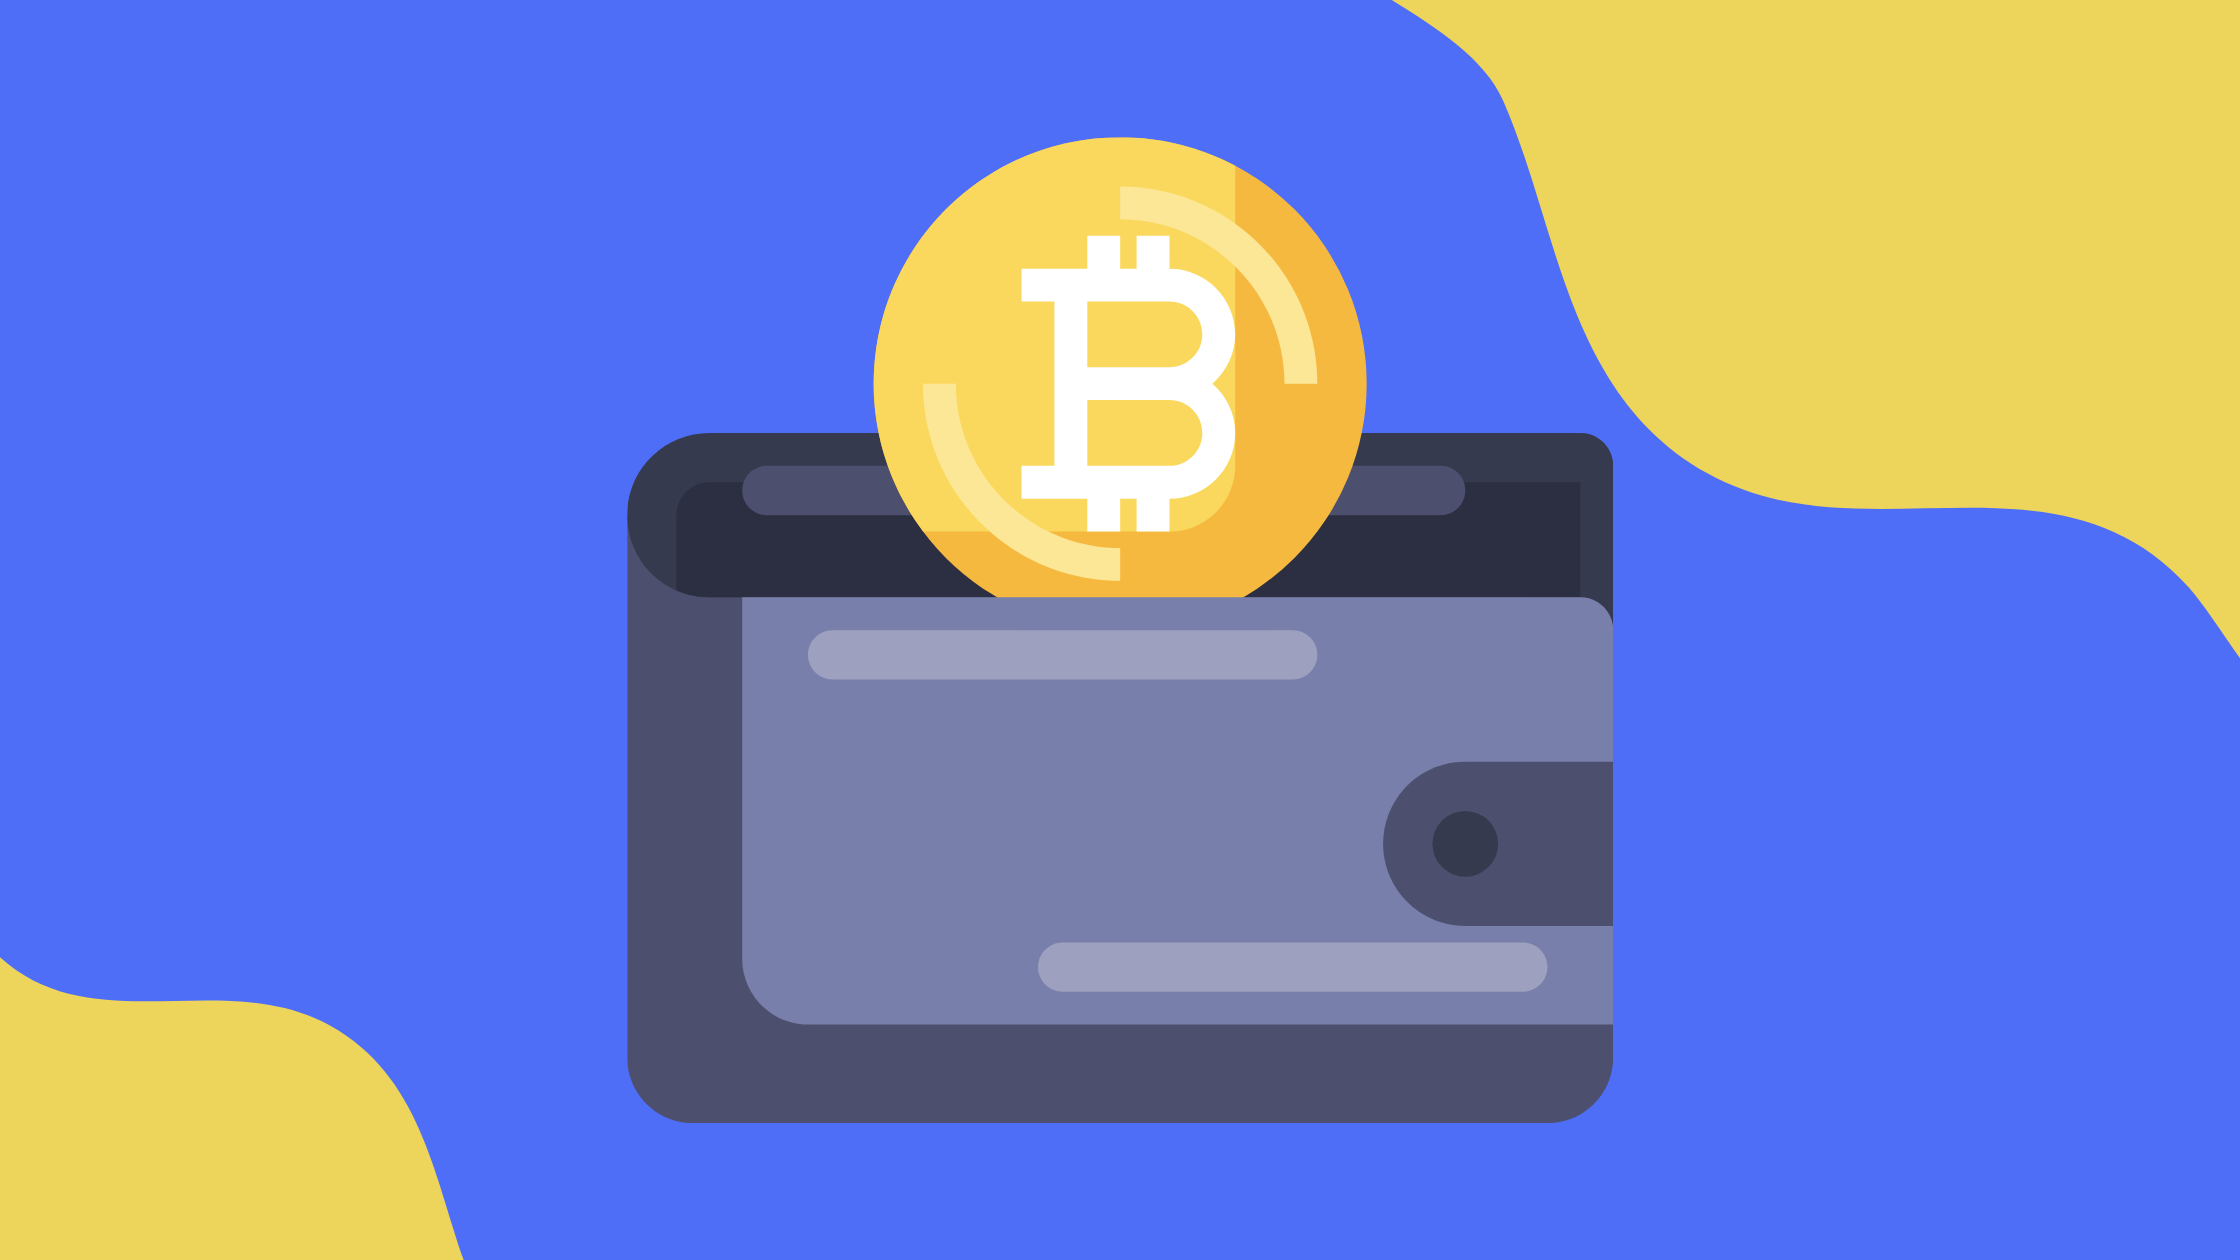 Guide to Bitcoin Wallets: How to Choose and Use Your Bitcoin Wallet